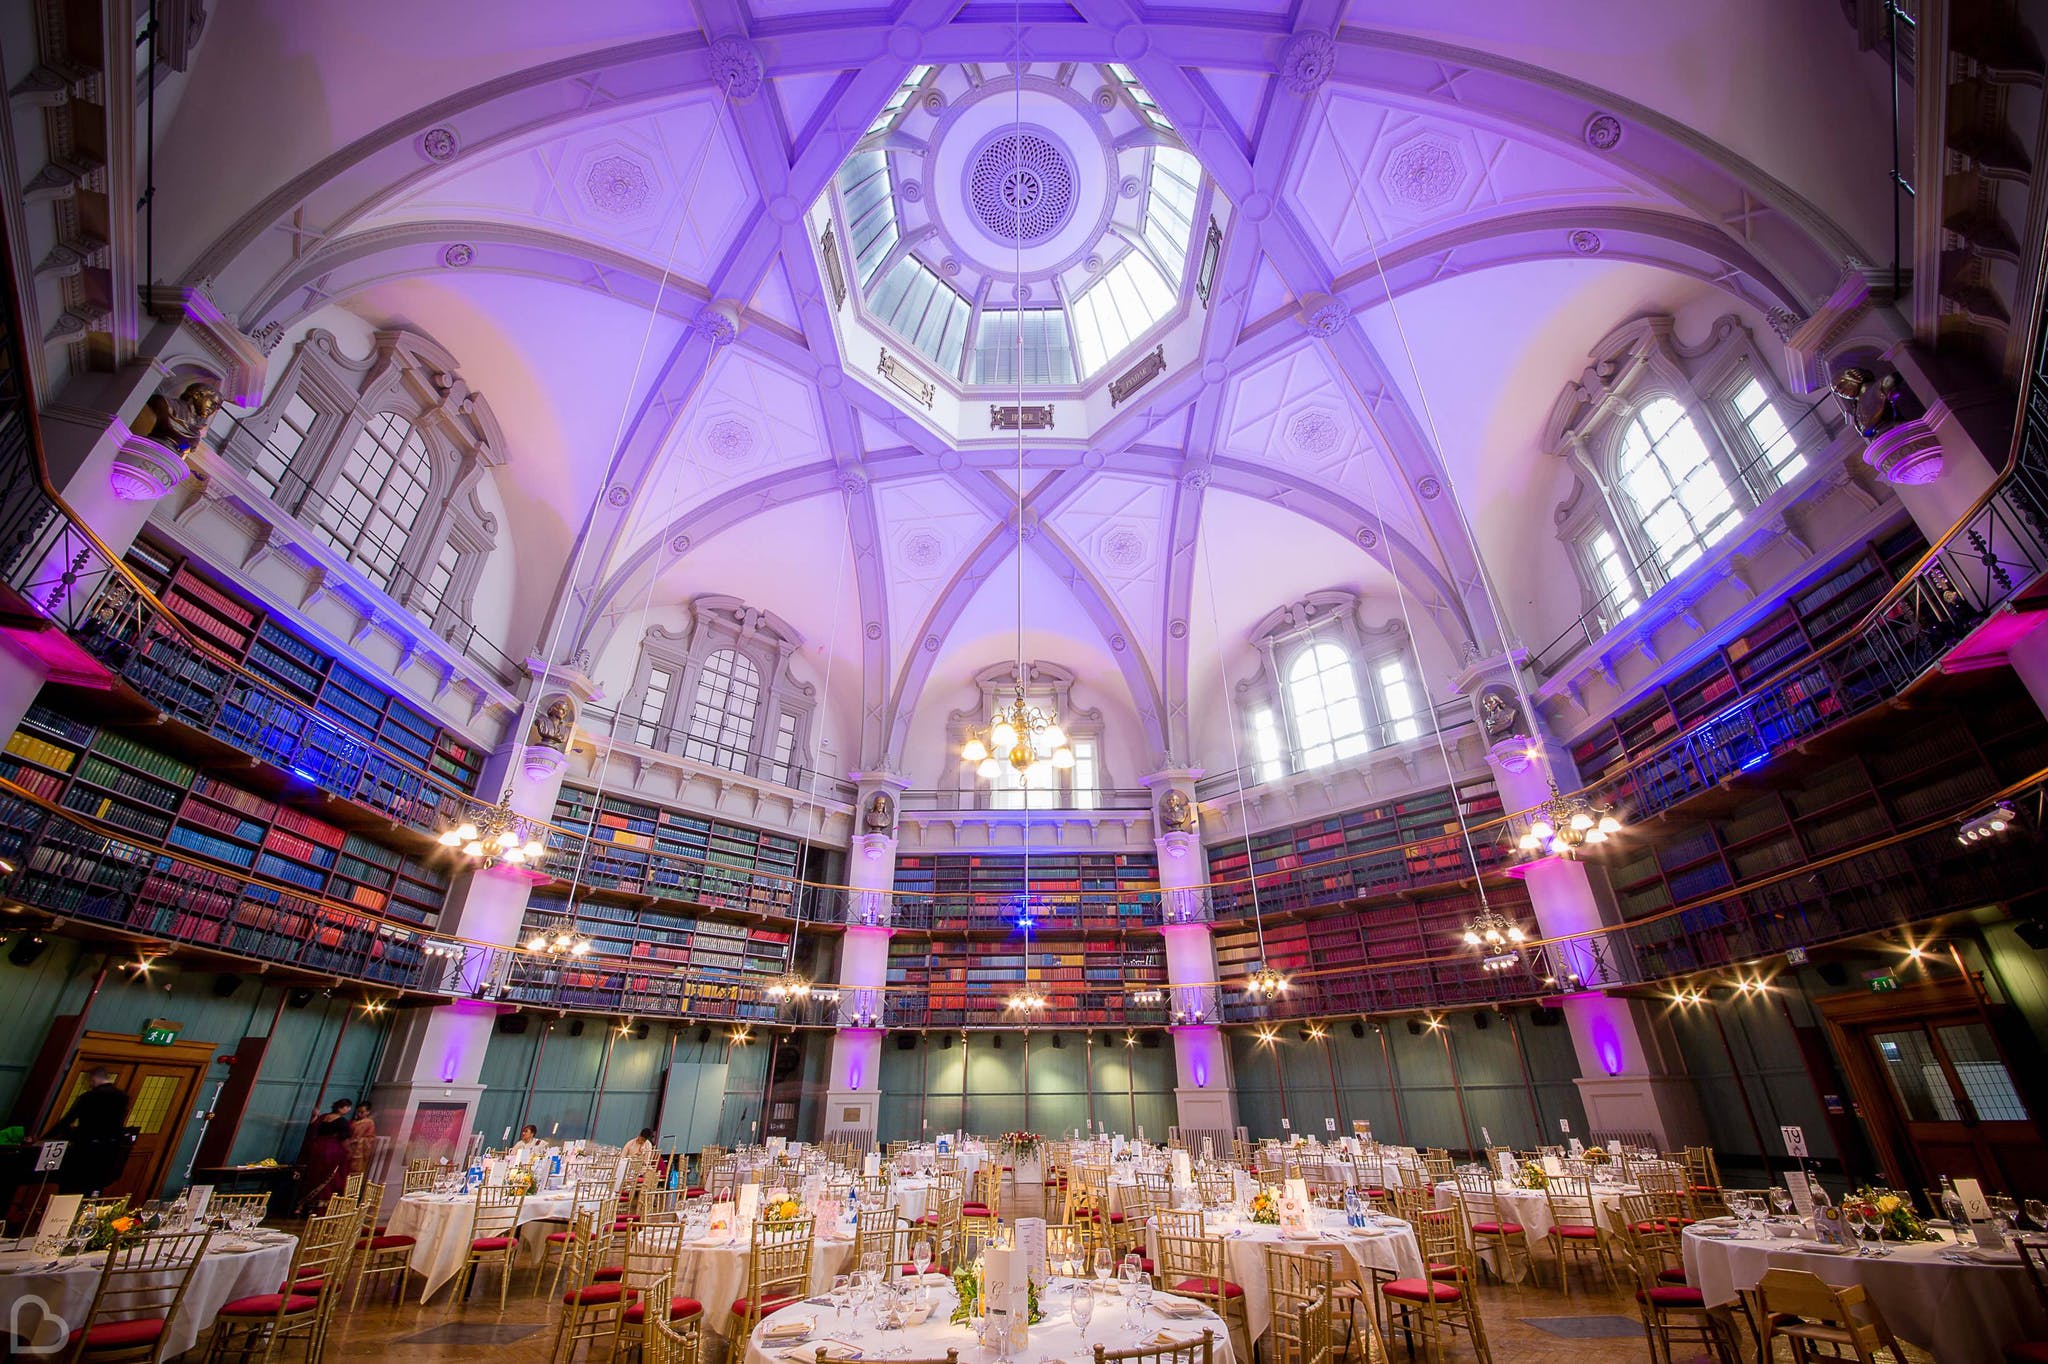 the bautiful high ceillings of QMUL, where a wedding reception is about to be hosted